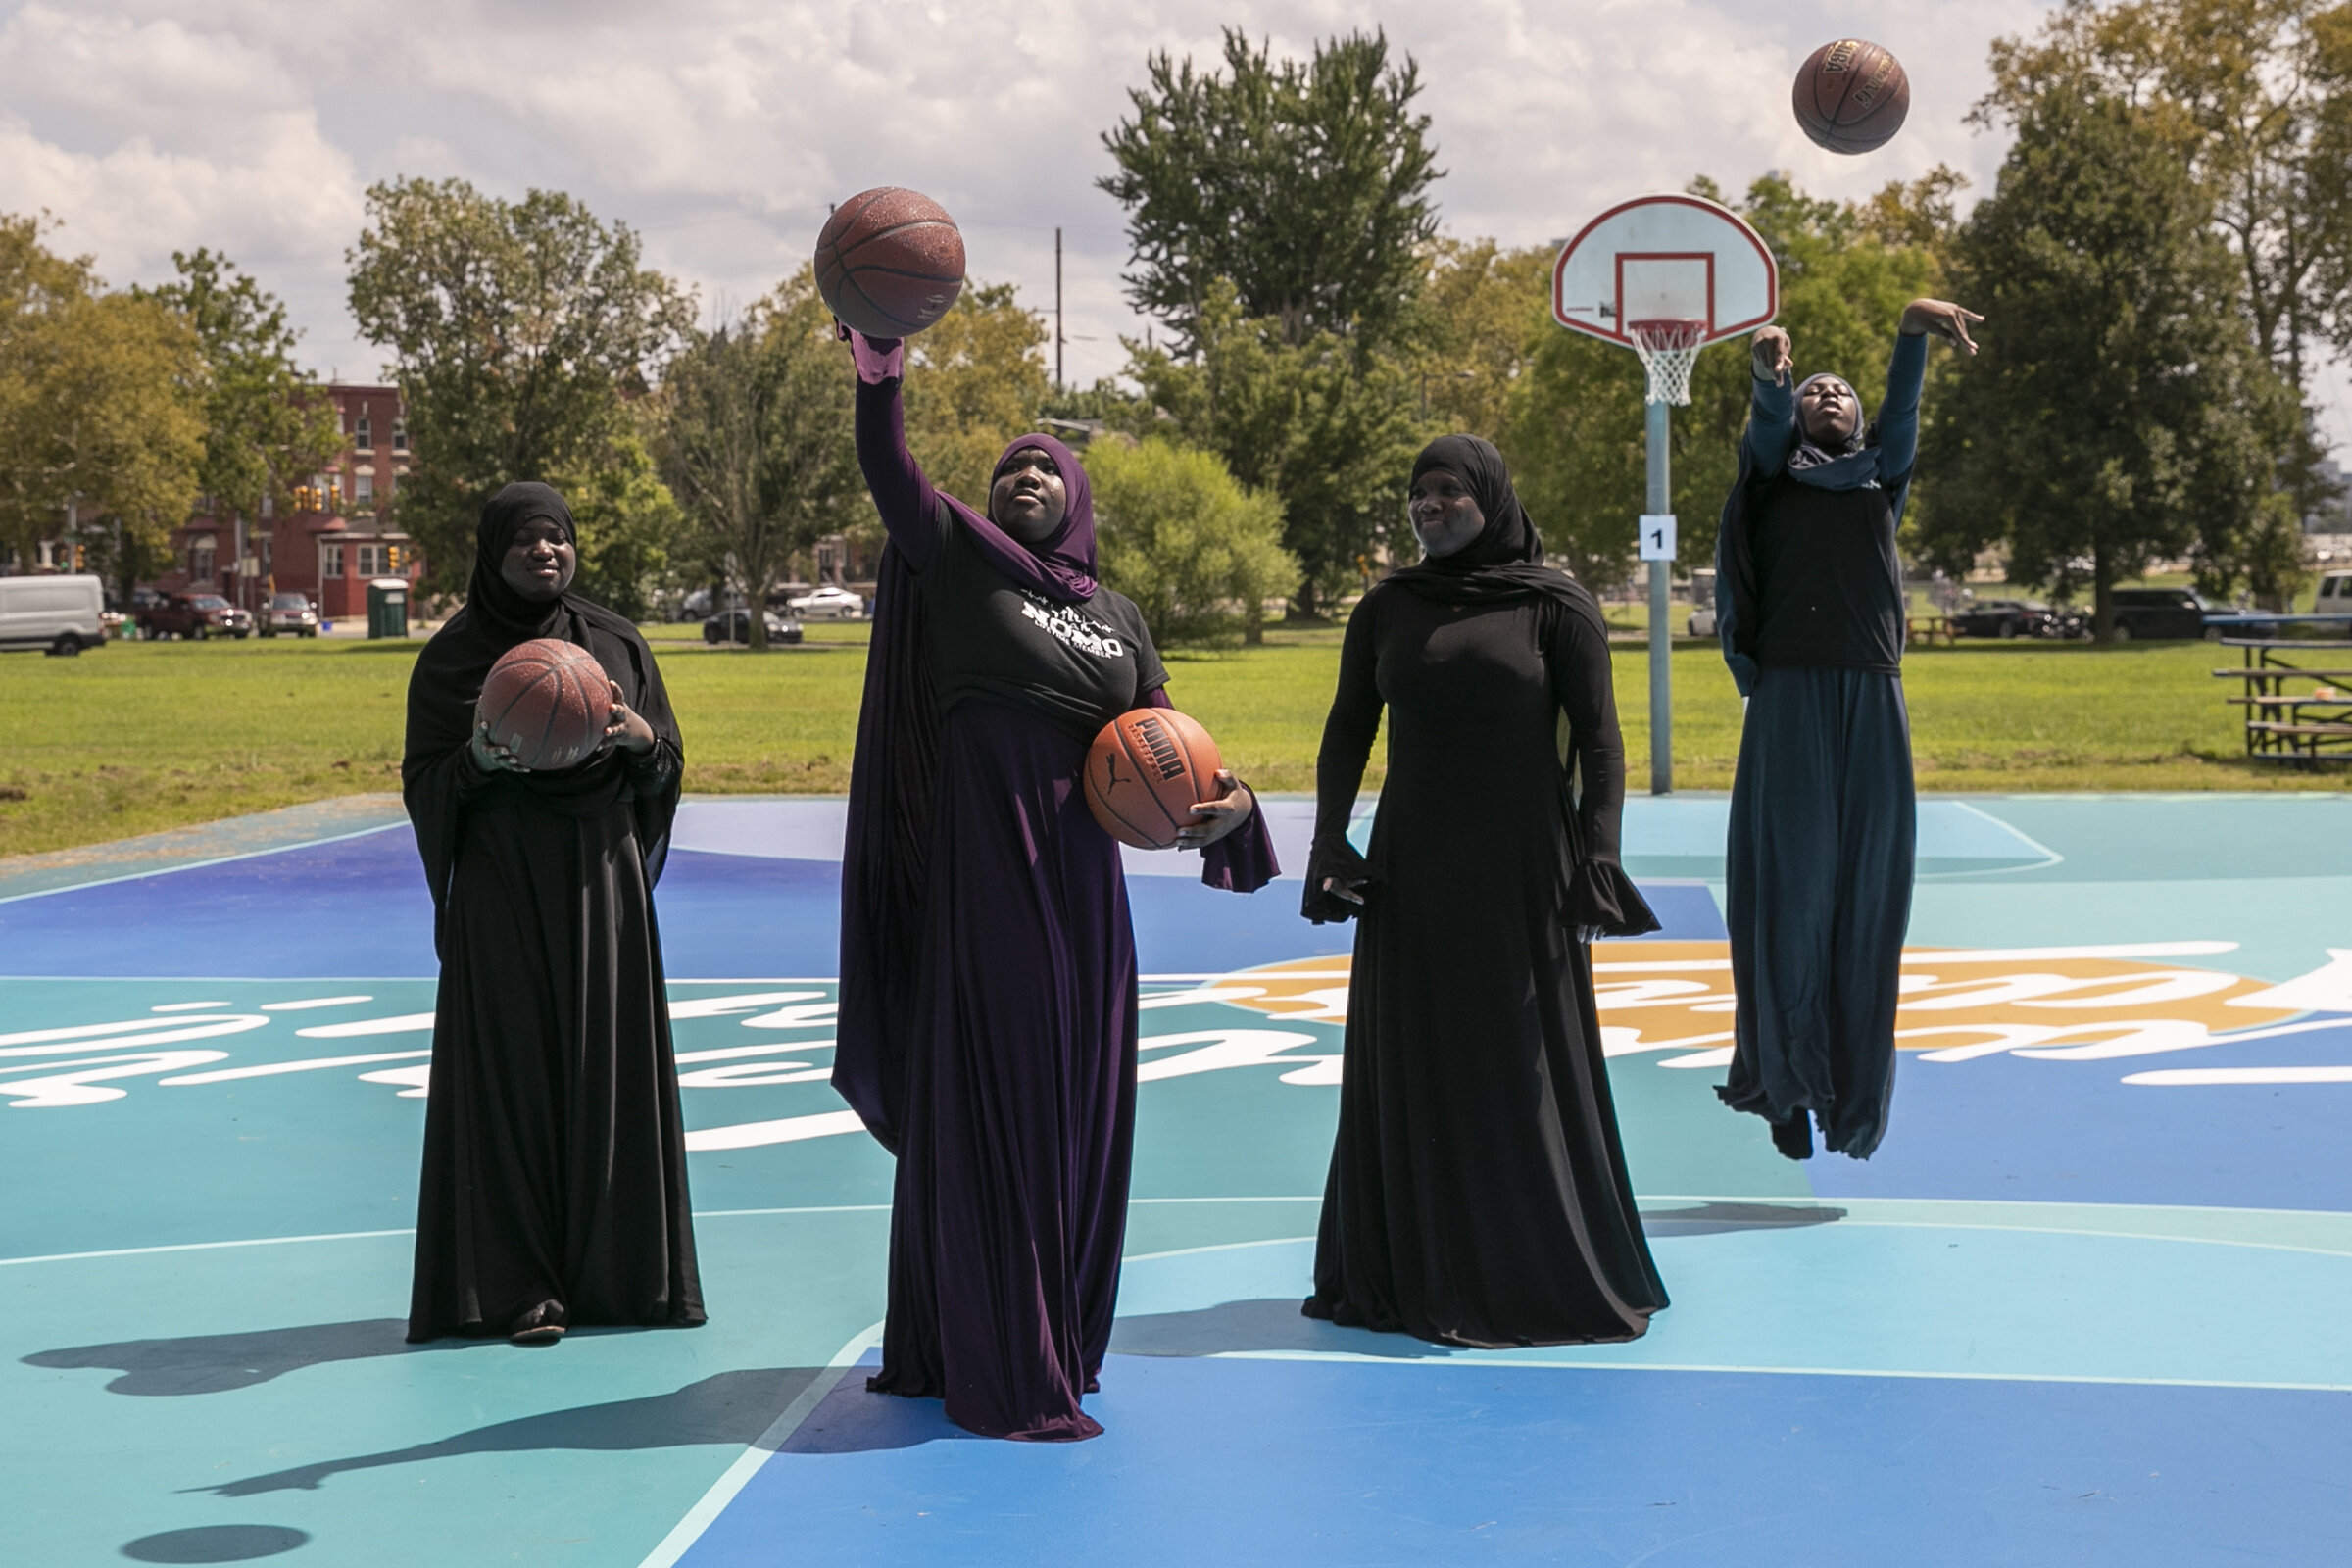  Khadijah Smith, 12, center left, holds two basketballs while she plays with Safiyyah Smith, center right, Baseerah Tucker, far right, and Ruqayyah Bibbs, left, on the refurbished and repainted basketball court at East Fairmount Park in the Strawberr